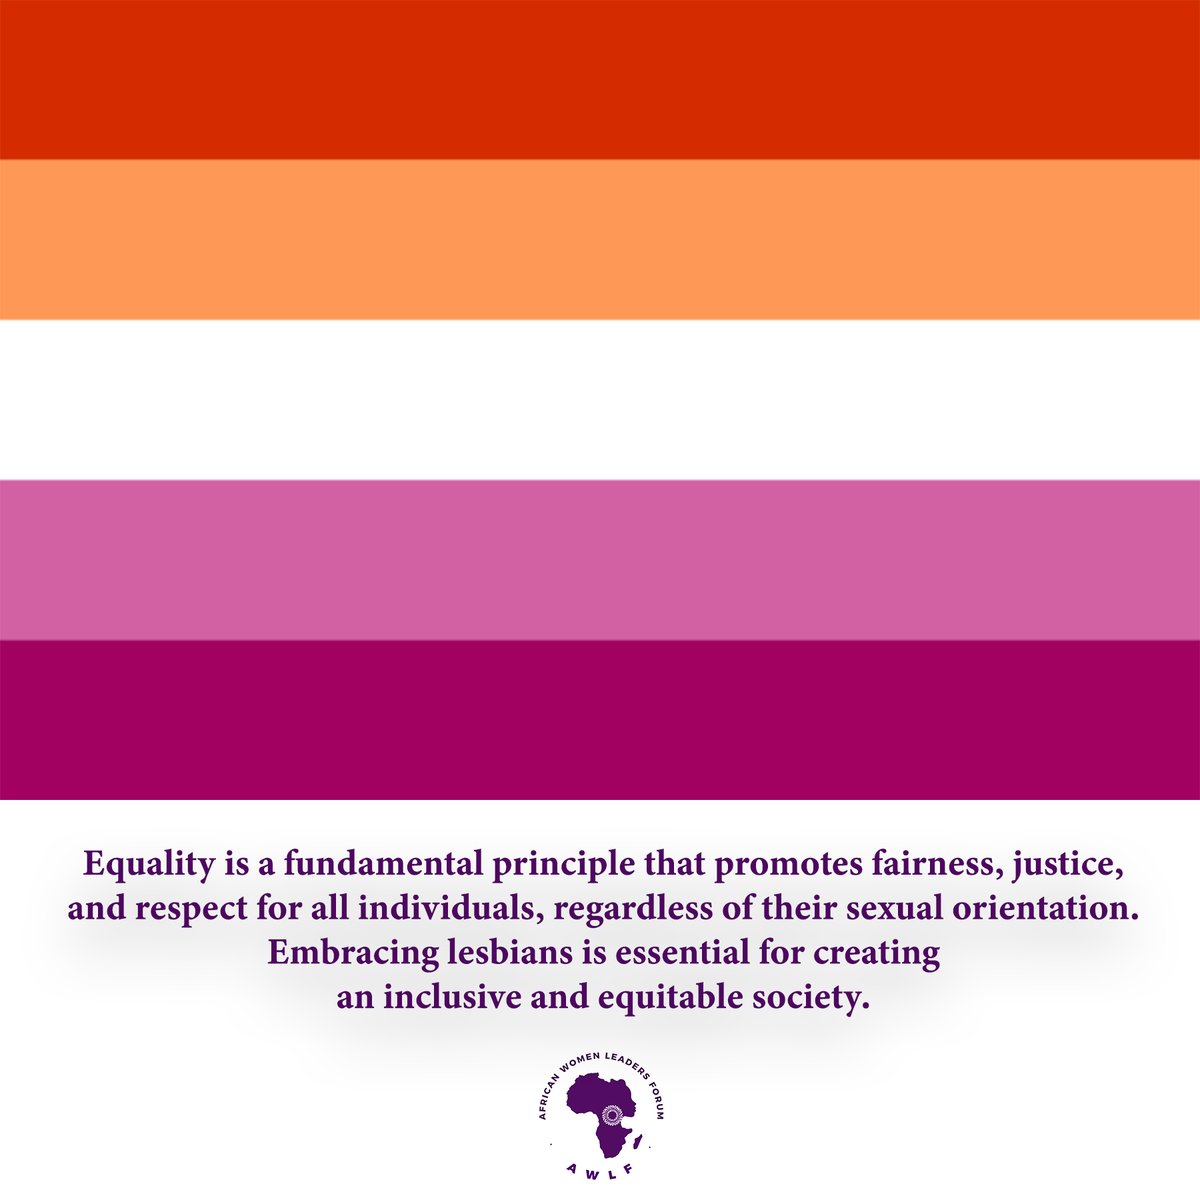 Myths and stereotypes about lesbians persist in many societies. Education and awareness help dispel misconceptions and promote understanding. Laws should protect lesbians from discrimination, violence, and unequal treatment. #LesbianVisibilityWeek #LGBTQ #equalityforall